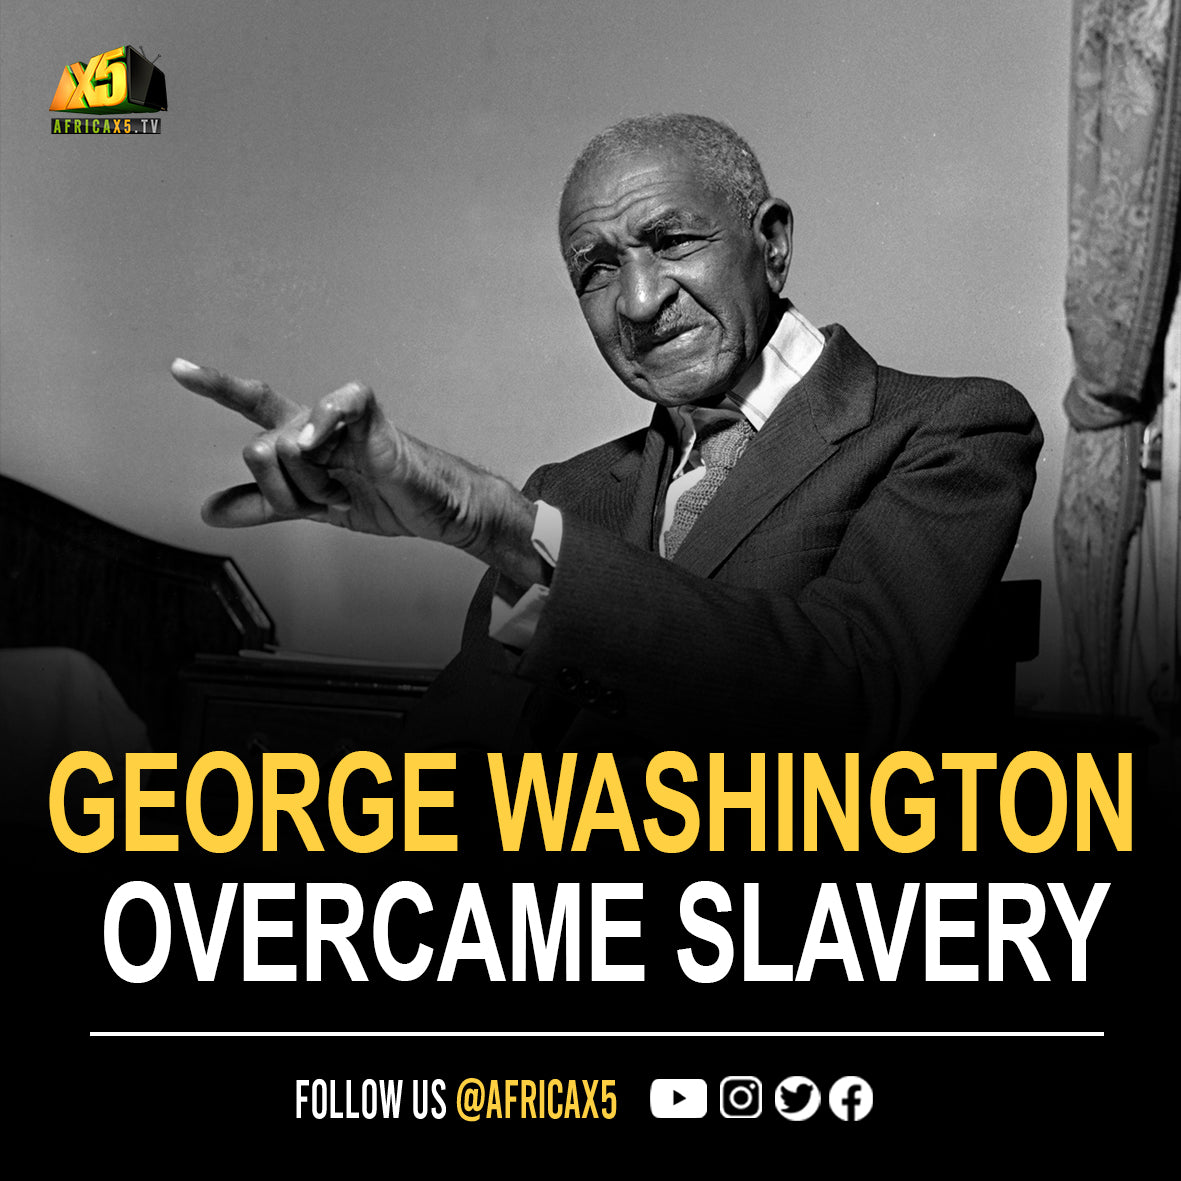 George Washington Carver overcame slavery to achieve fame as a scientist, botanist and educator.